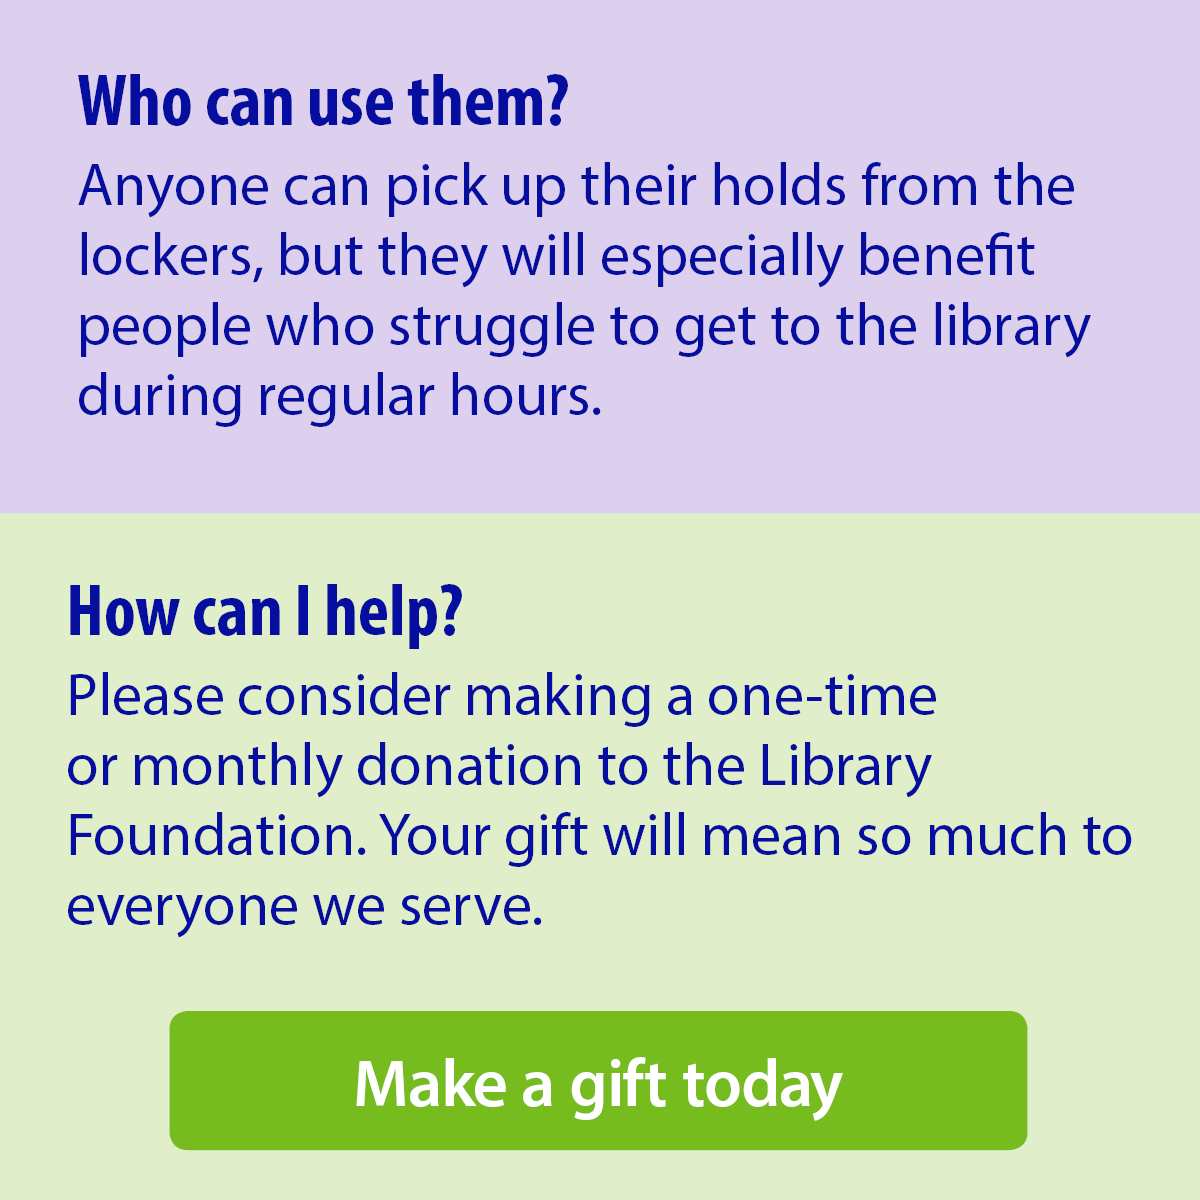 Who can use them? Anyone can pick up their holds from the lockers, but they will especially benefit people who struggle to get to the library during regular hours. How can I help? Please consider making a one-time or monthly donation to the Library Foundation. Your gift will mean so much to everyone we serve. Make a gift today